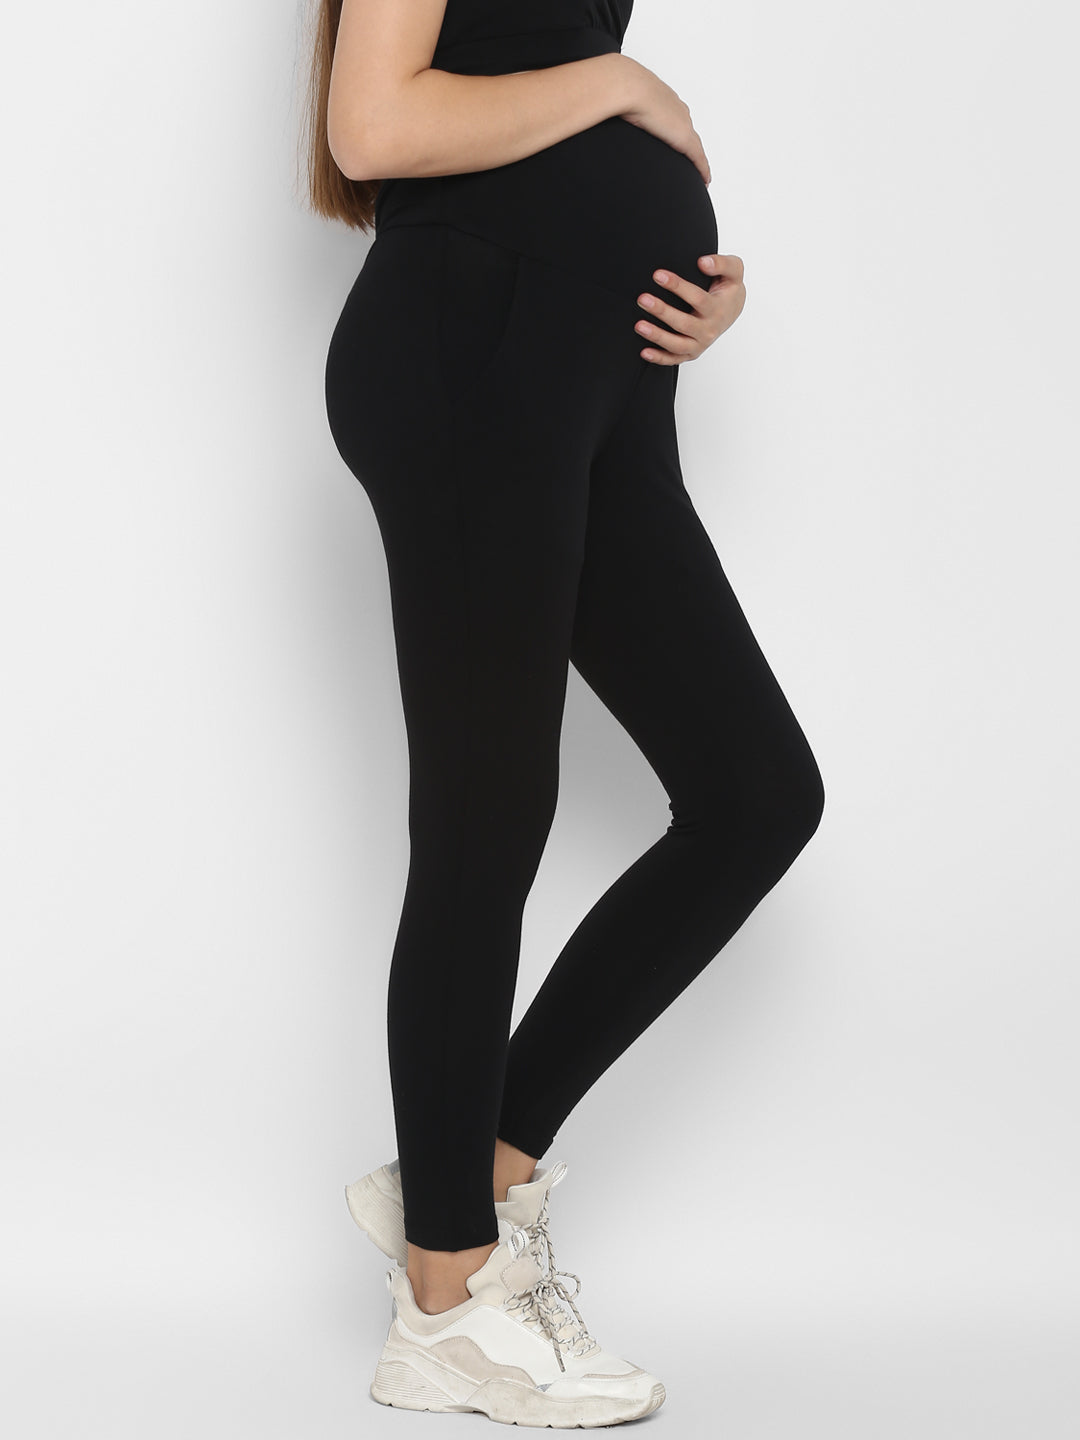 QGGQDD 2 Pack Maternity Leggings Over The Belly with Pockets, Womens Black  High Waisted Workout Pregnancy Pants at Amazon Women's Clothing store